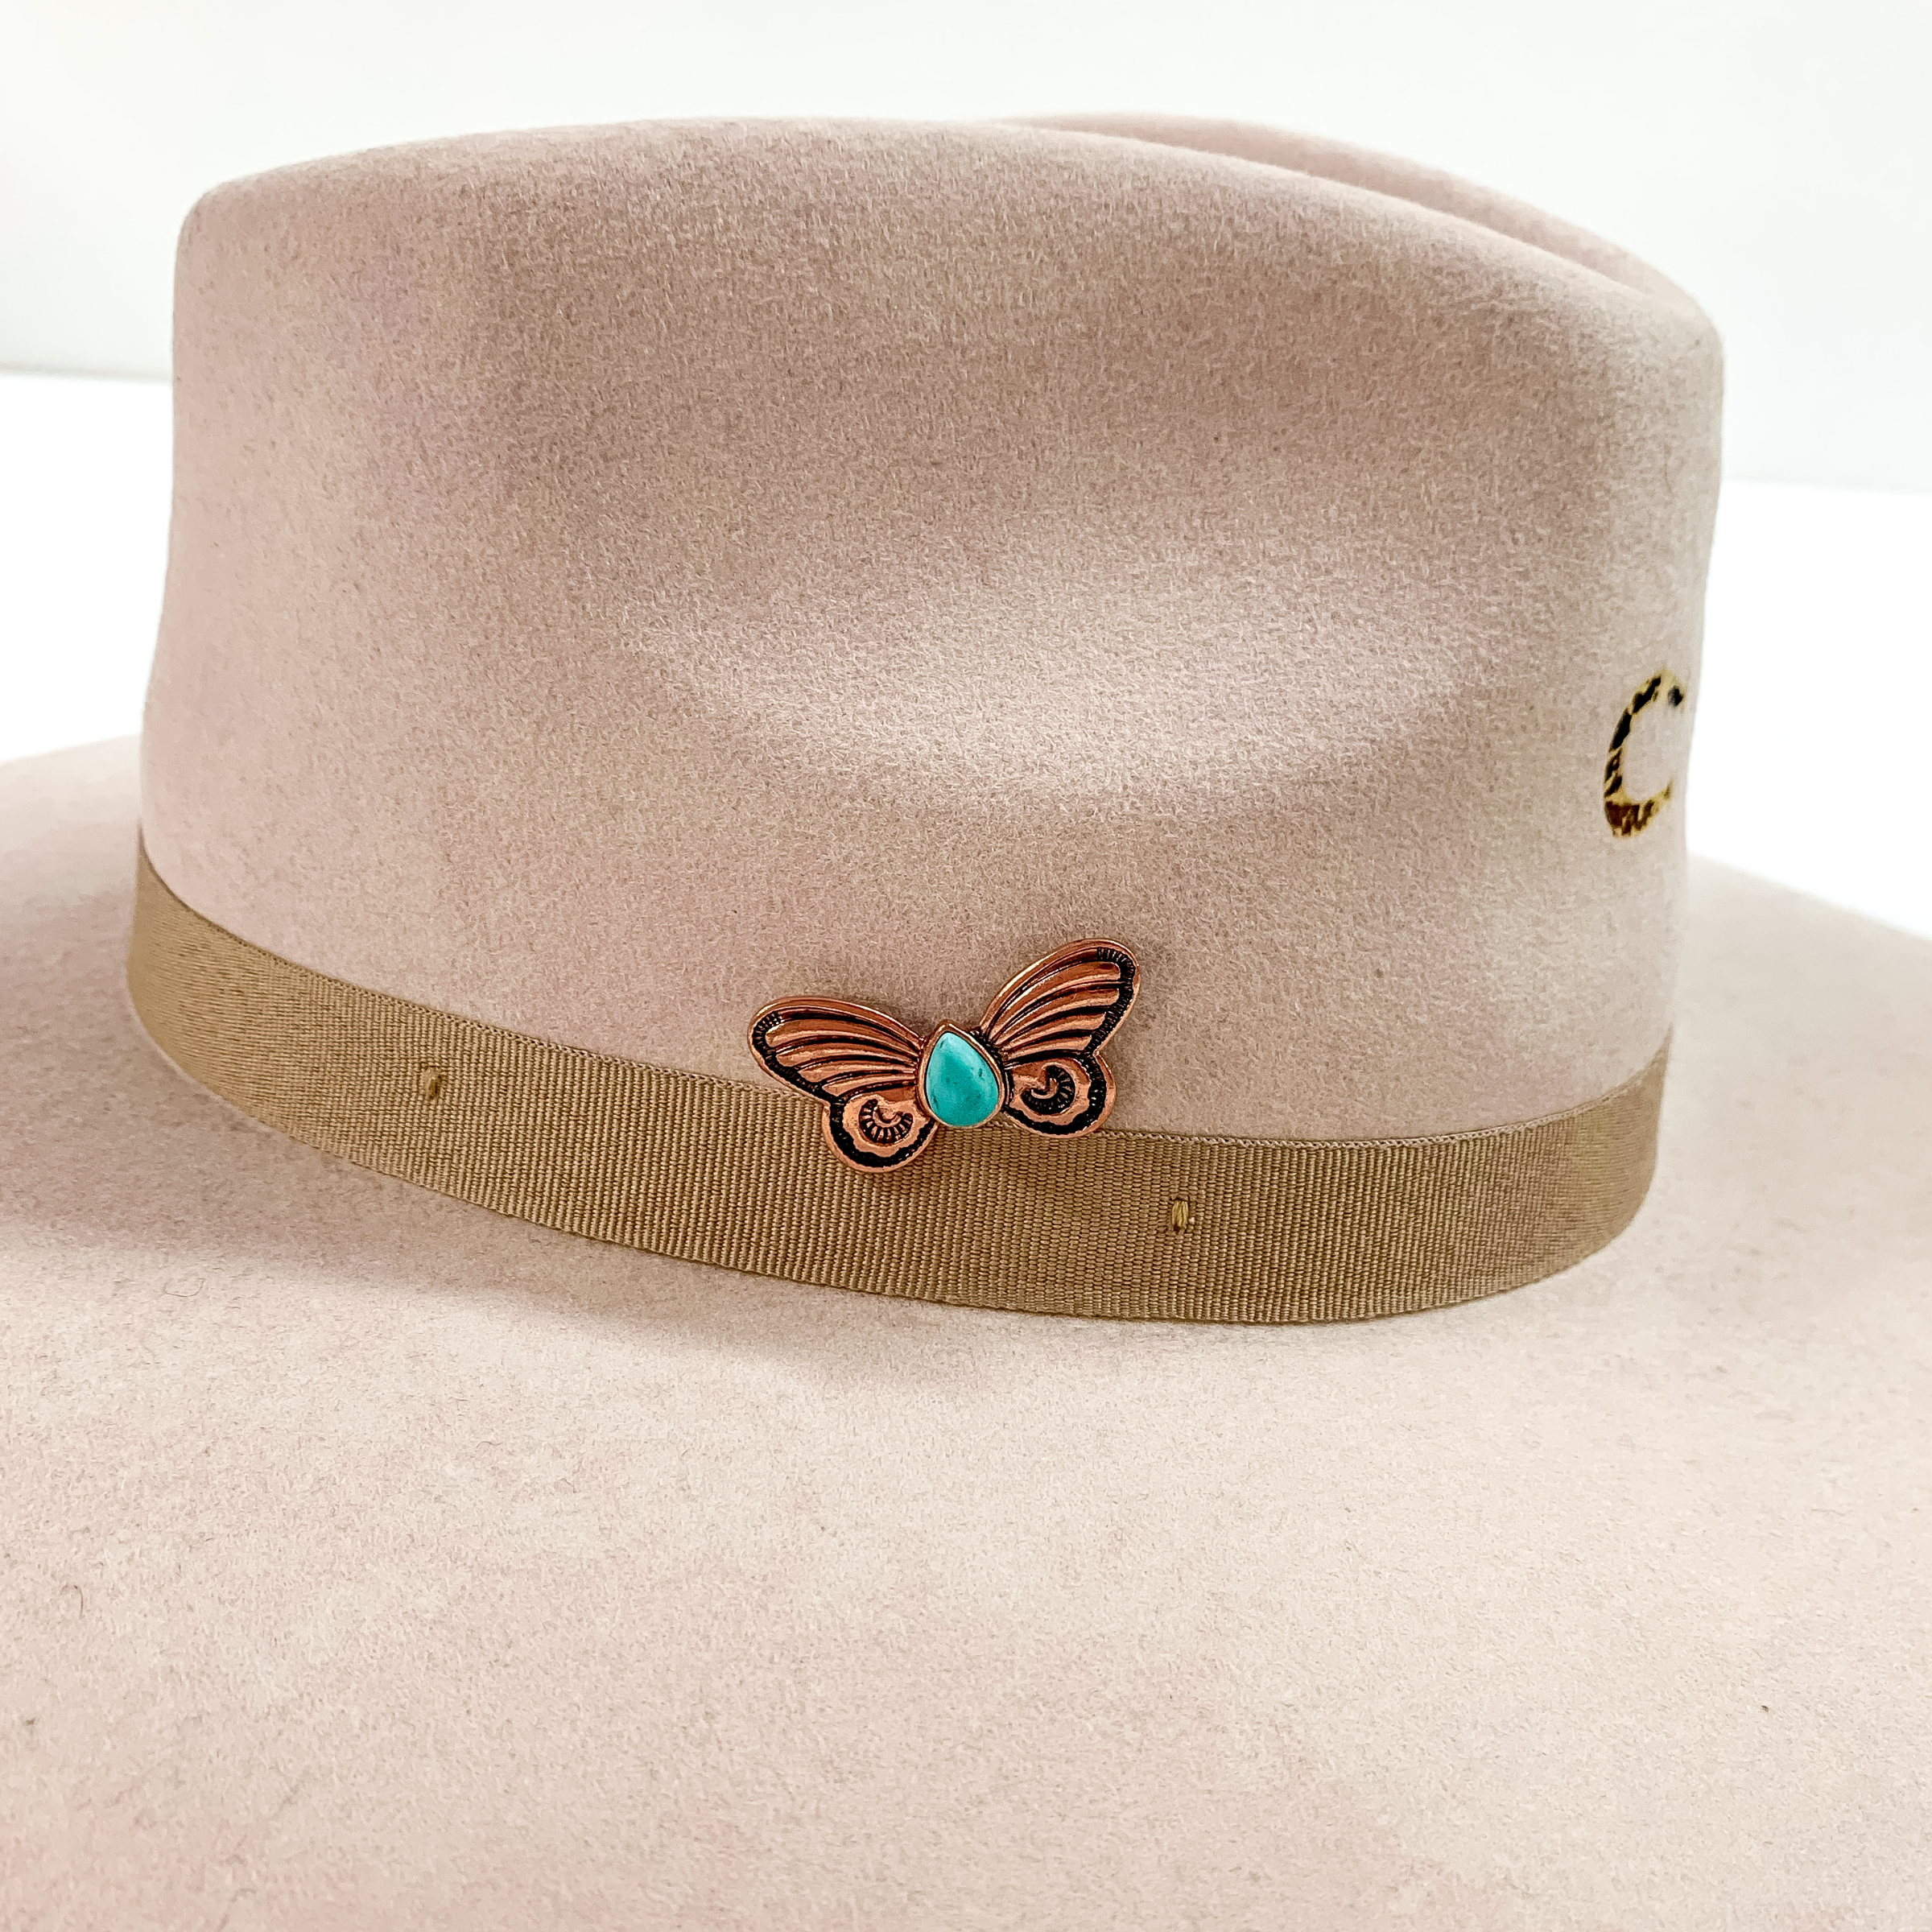 Butterfly Hat Pin with a Teardrop Turquoise Stone in Copper Tone - Giddy Up Glamour Boutique